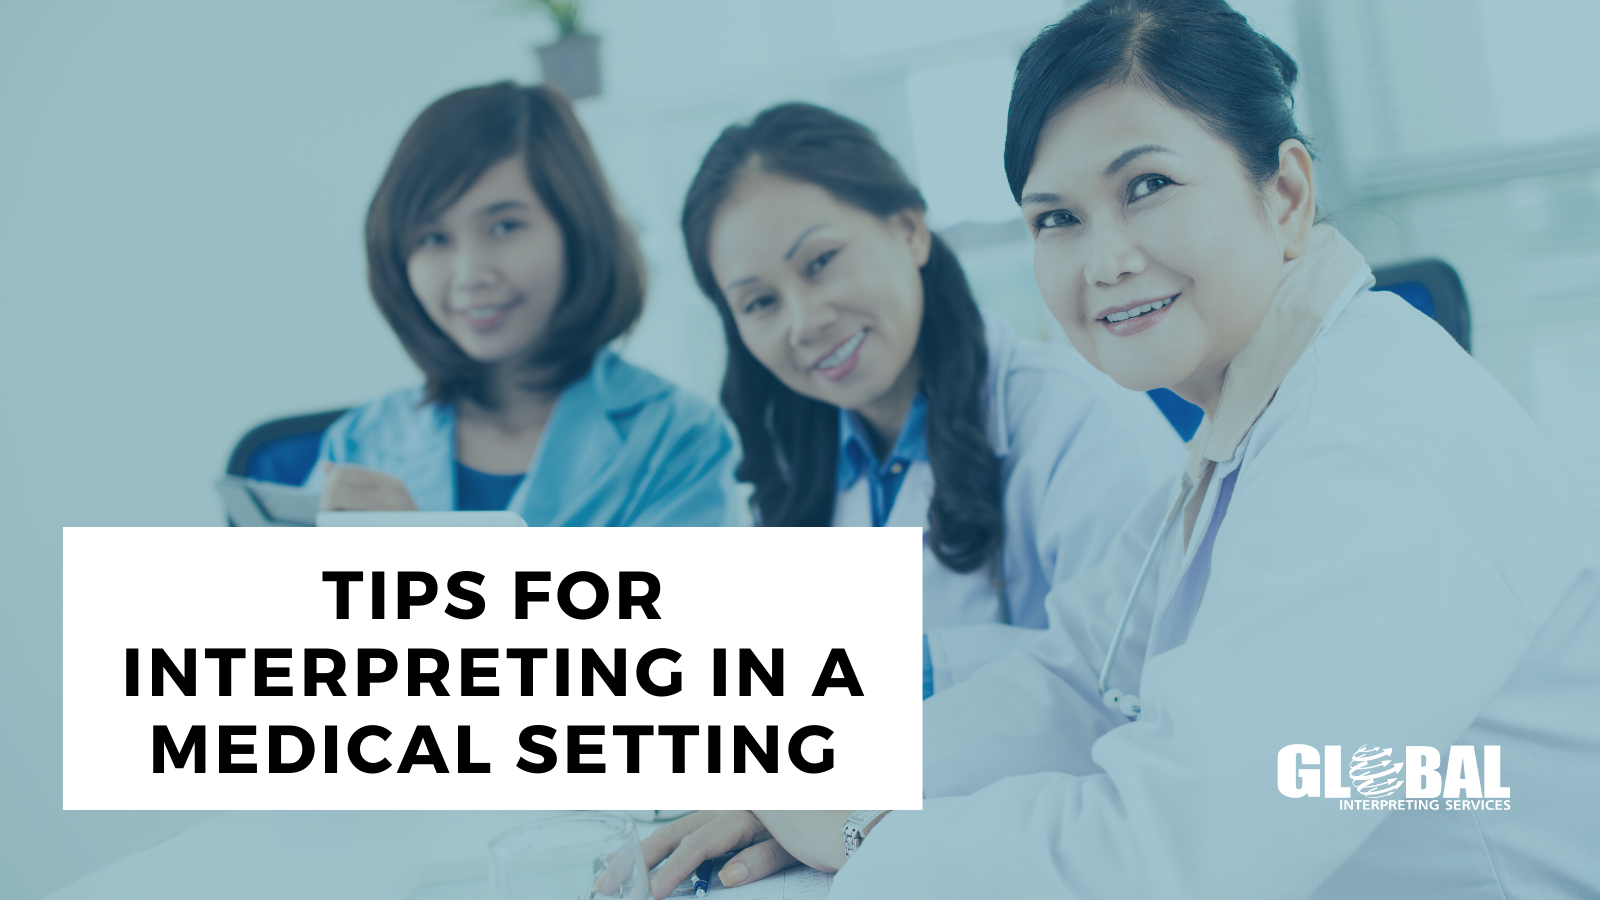 9 Tips for Interpreting in a Medical Setting